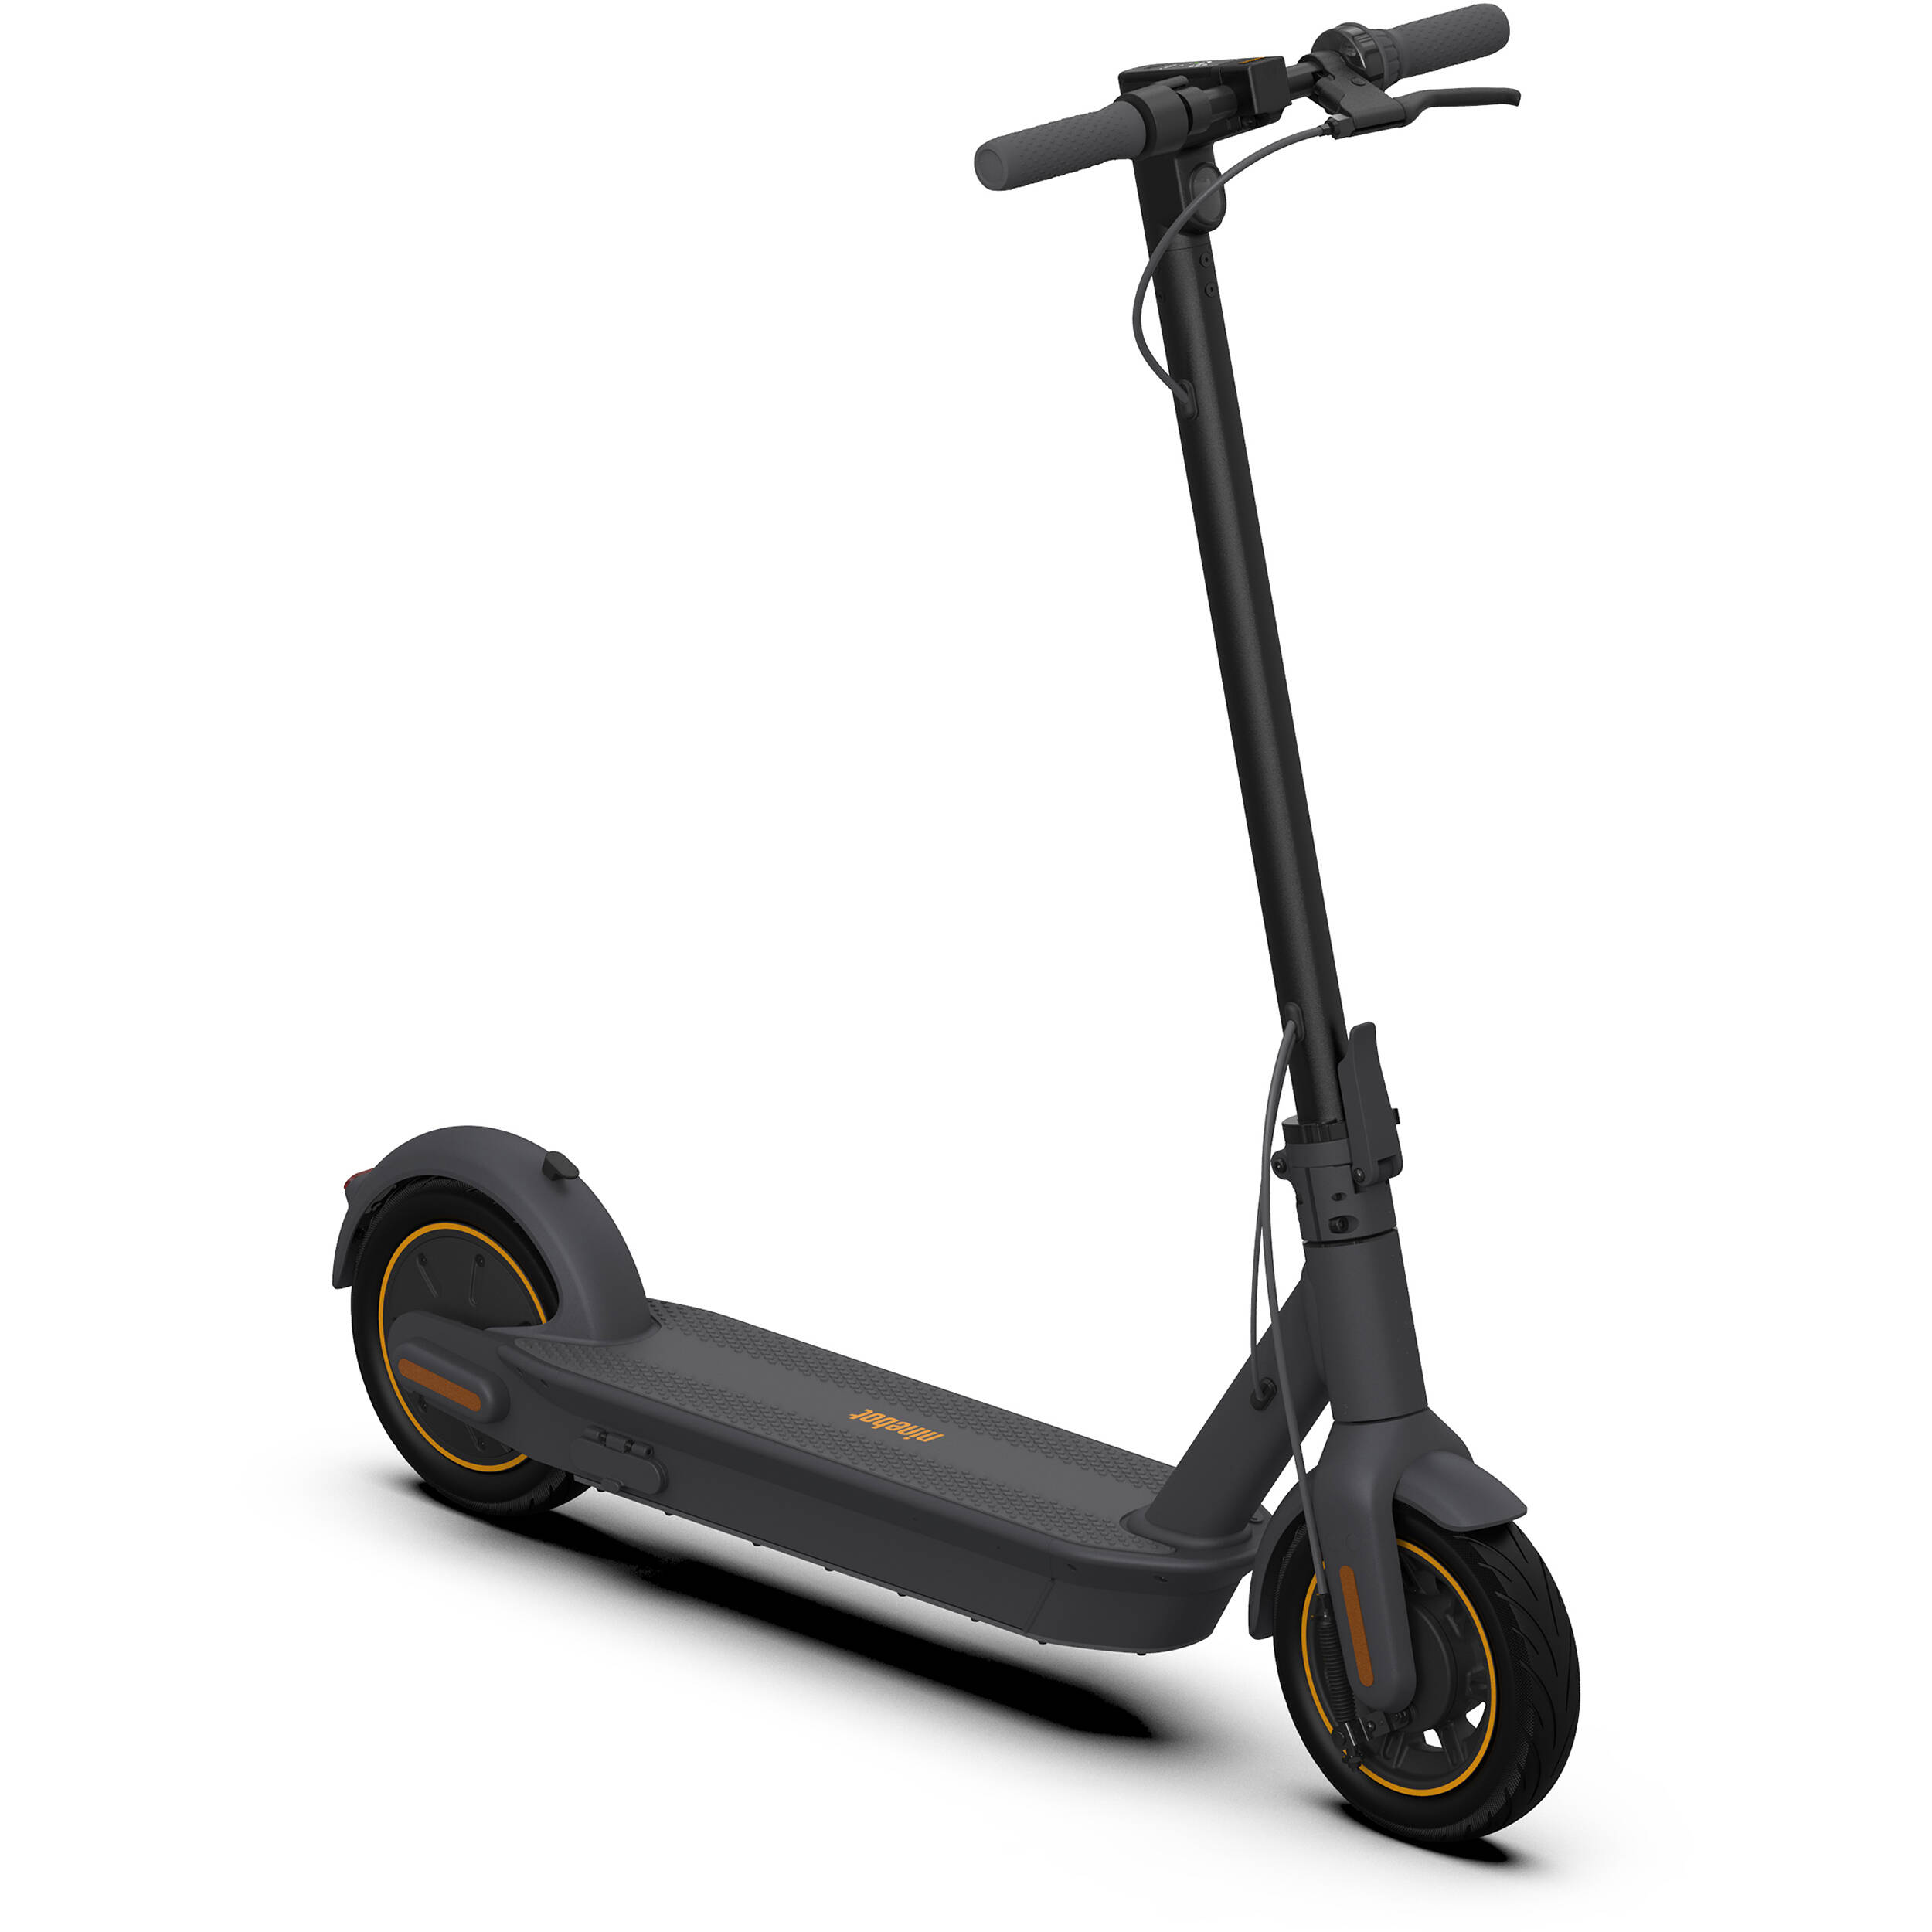 Brand new Electric Cycle for sale